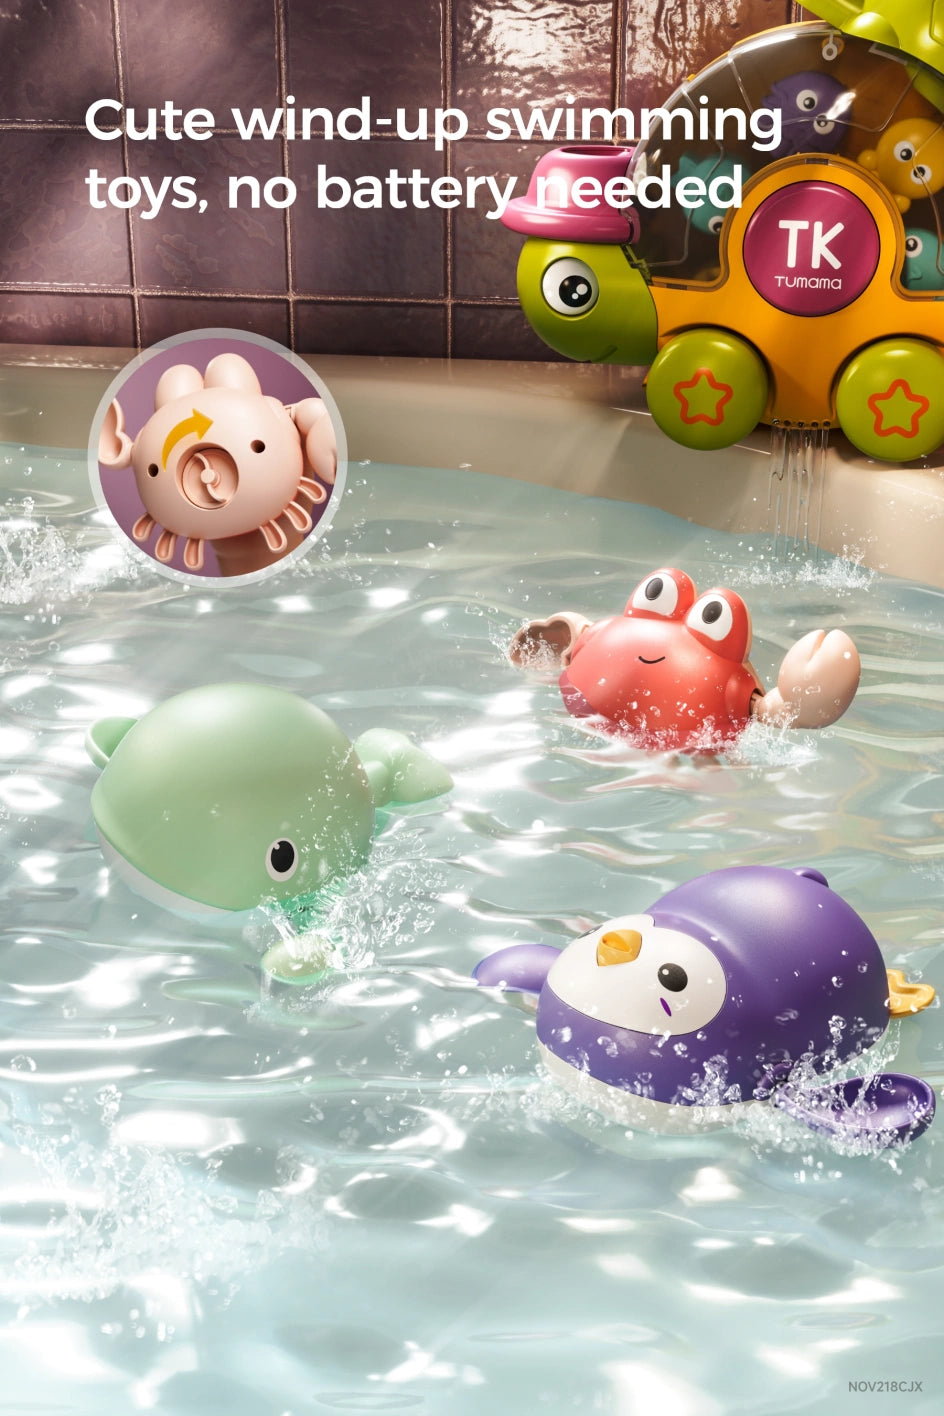 Toddler_s bath time enjoyment with wind up toys